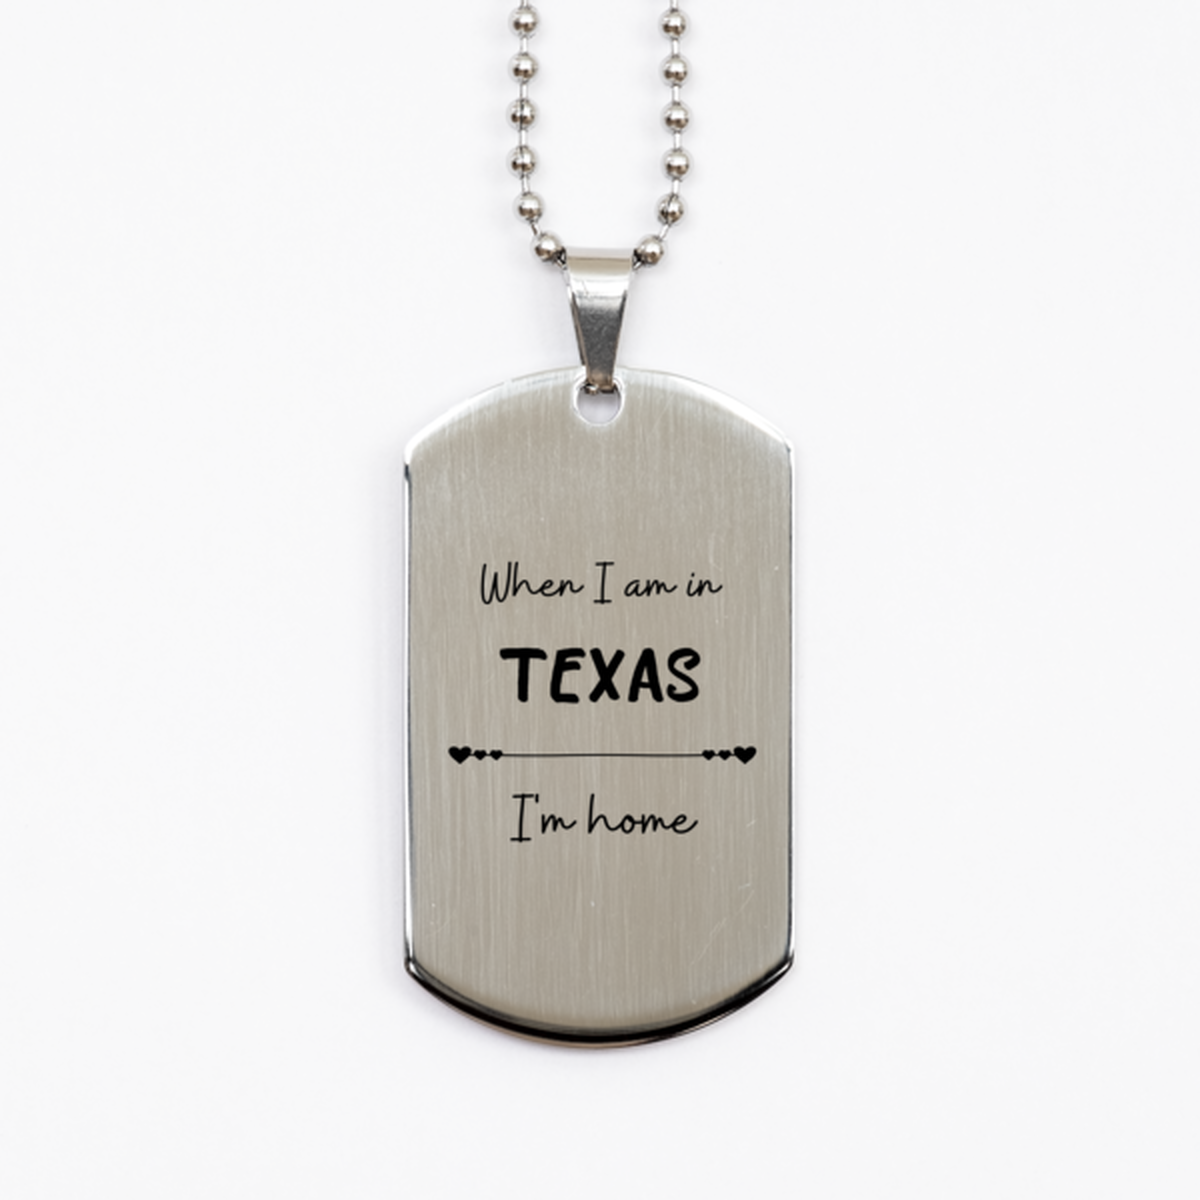 When I am in Texas I'm home Silver Dog Tag, Cheap Gifts For Texas, State Texas Birthday Gifts for Friends Coworker